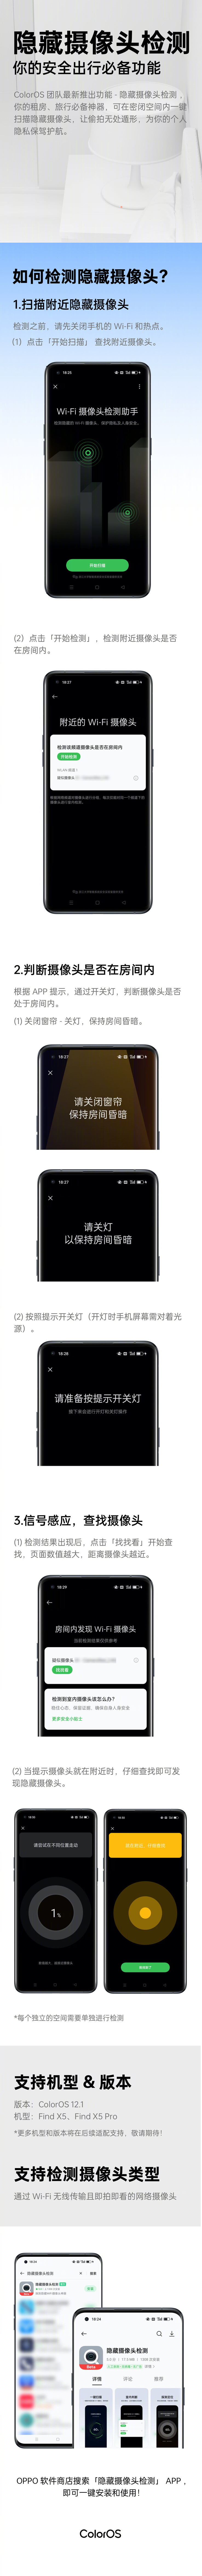 OPPO's new Hidden Camera Detect feature infographic. (Source: OPPO via Weibo)